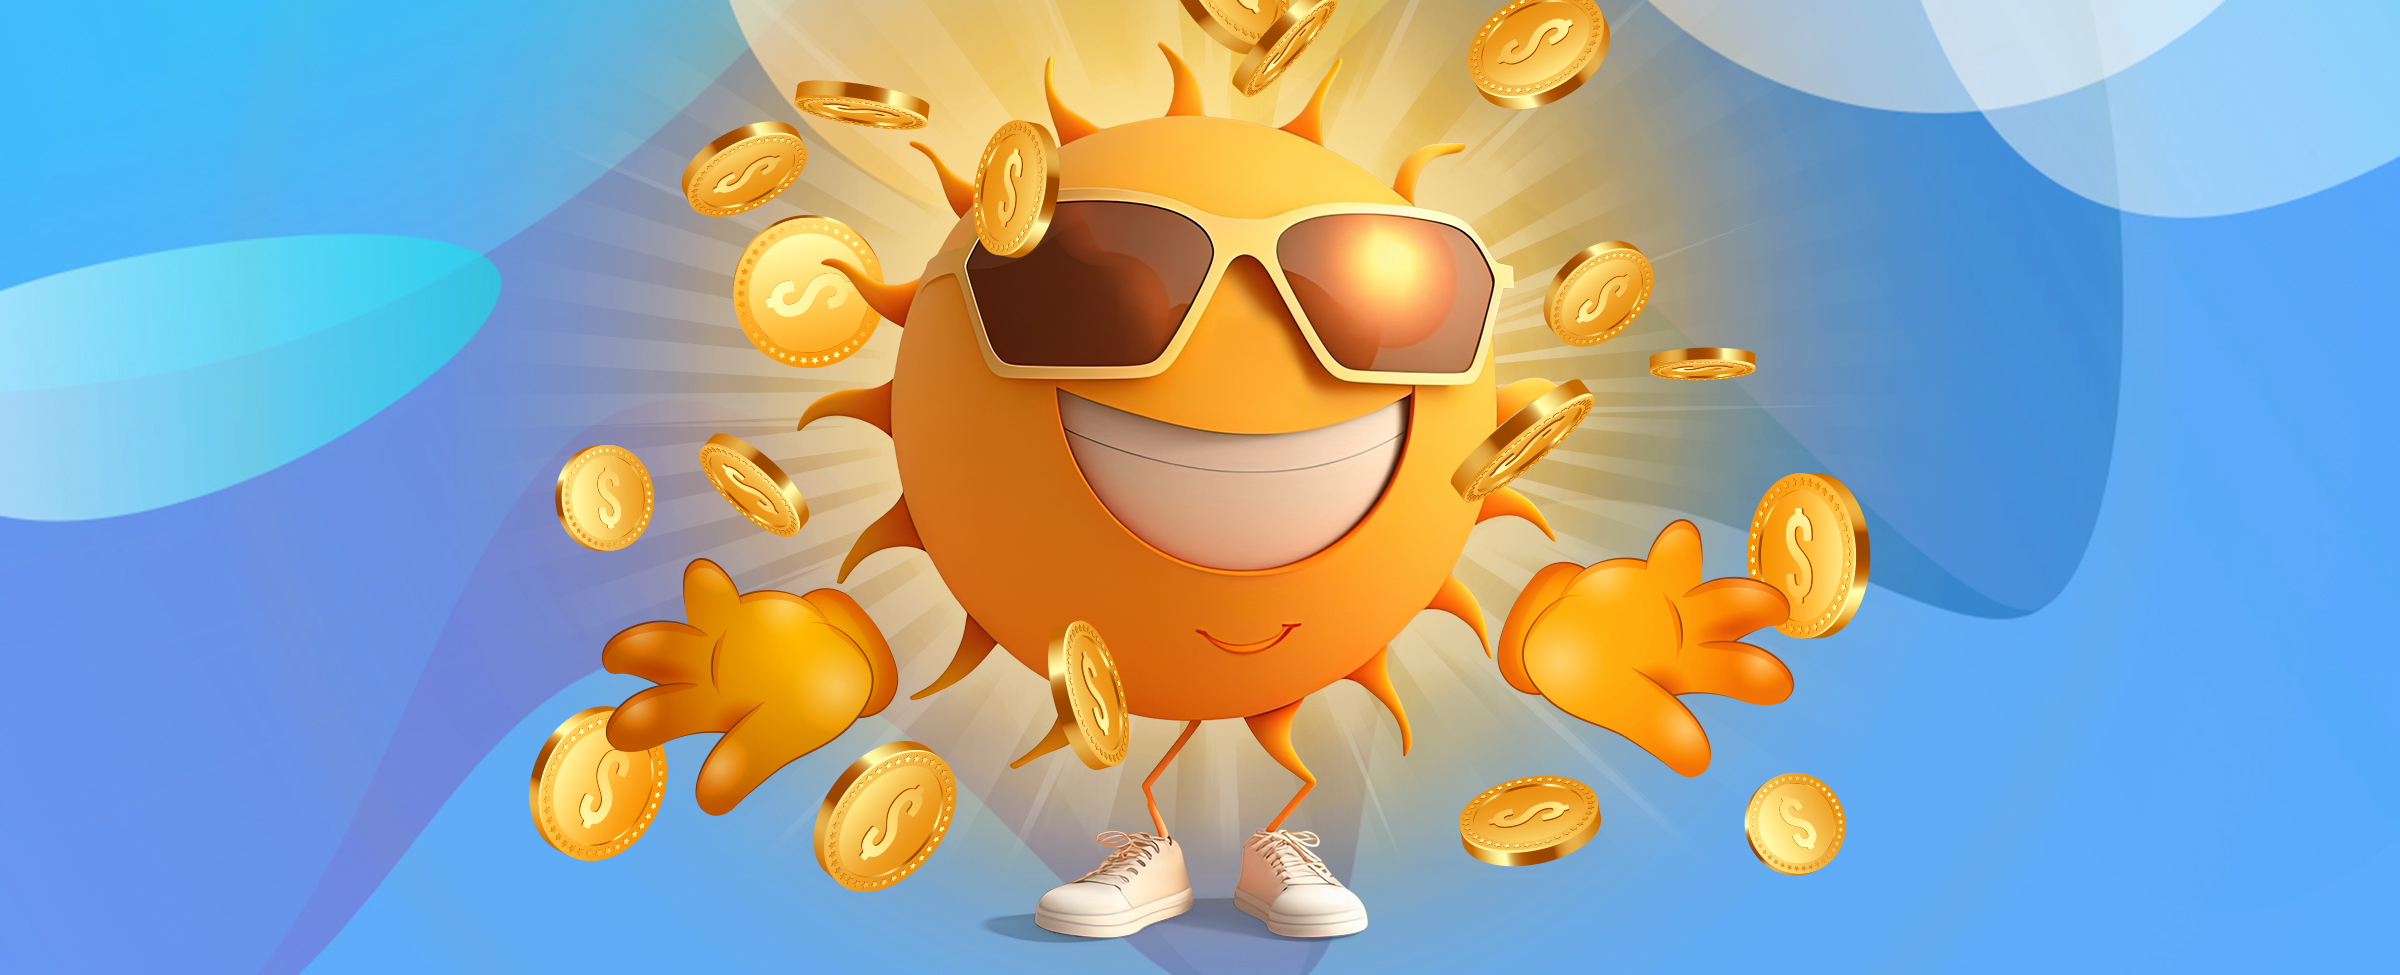 A 3D-animated sun, smiling, showing large, white teeth, wearing thick-framed sunglasses reflecting light from a distance, while gold coins fall around it.